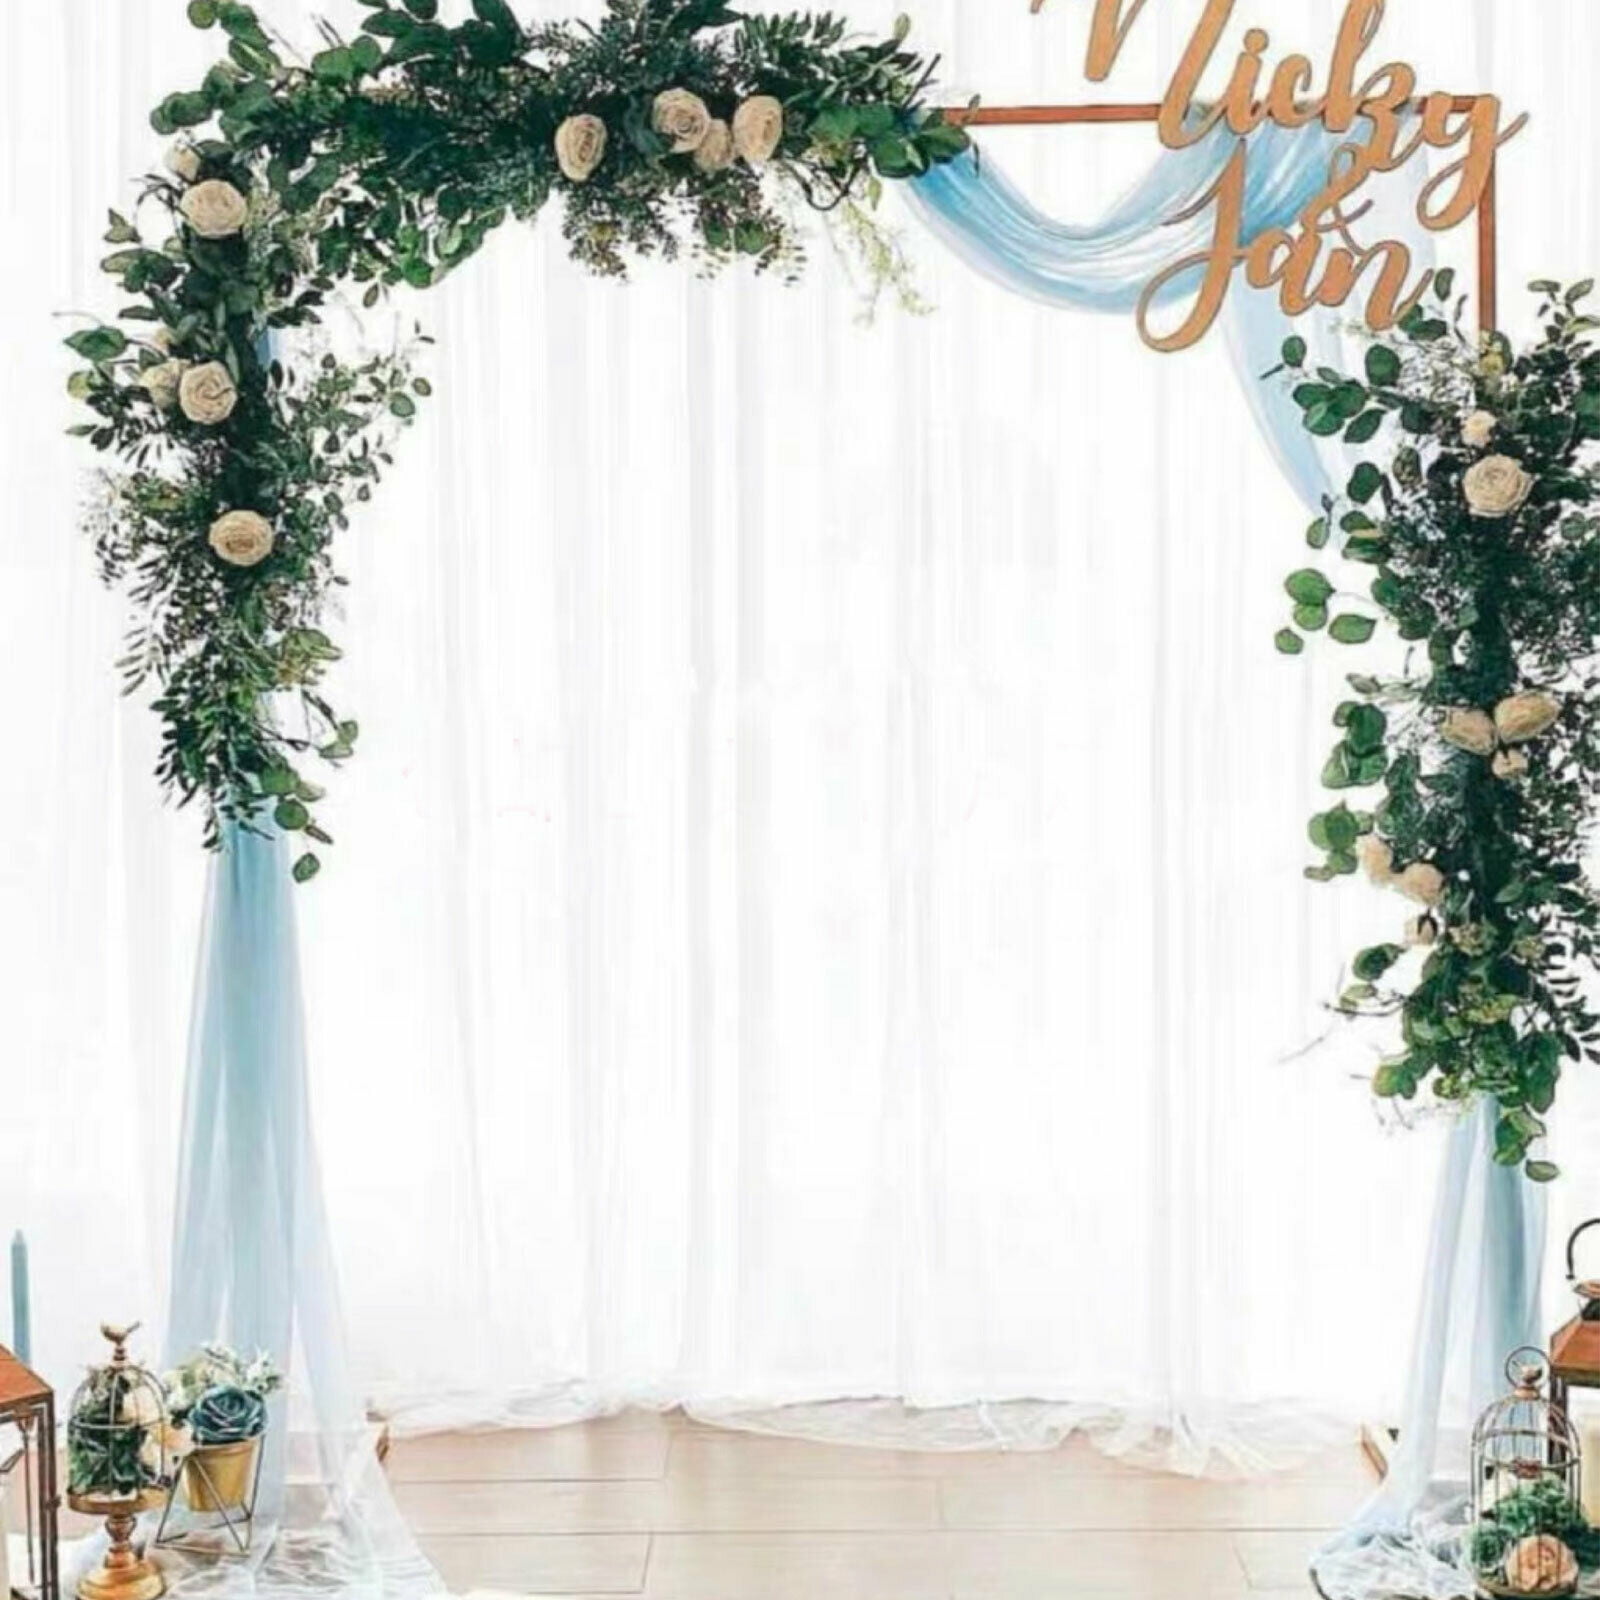 OUKANING Wedding Arch Backdrop Stand Party Metal Square Arch Stand Pipe Kit Wedding Arches Background Door for Window Landscape Birthday Party Theme Decoration 2x2M Gold 